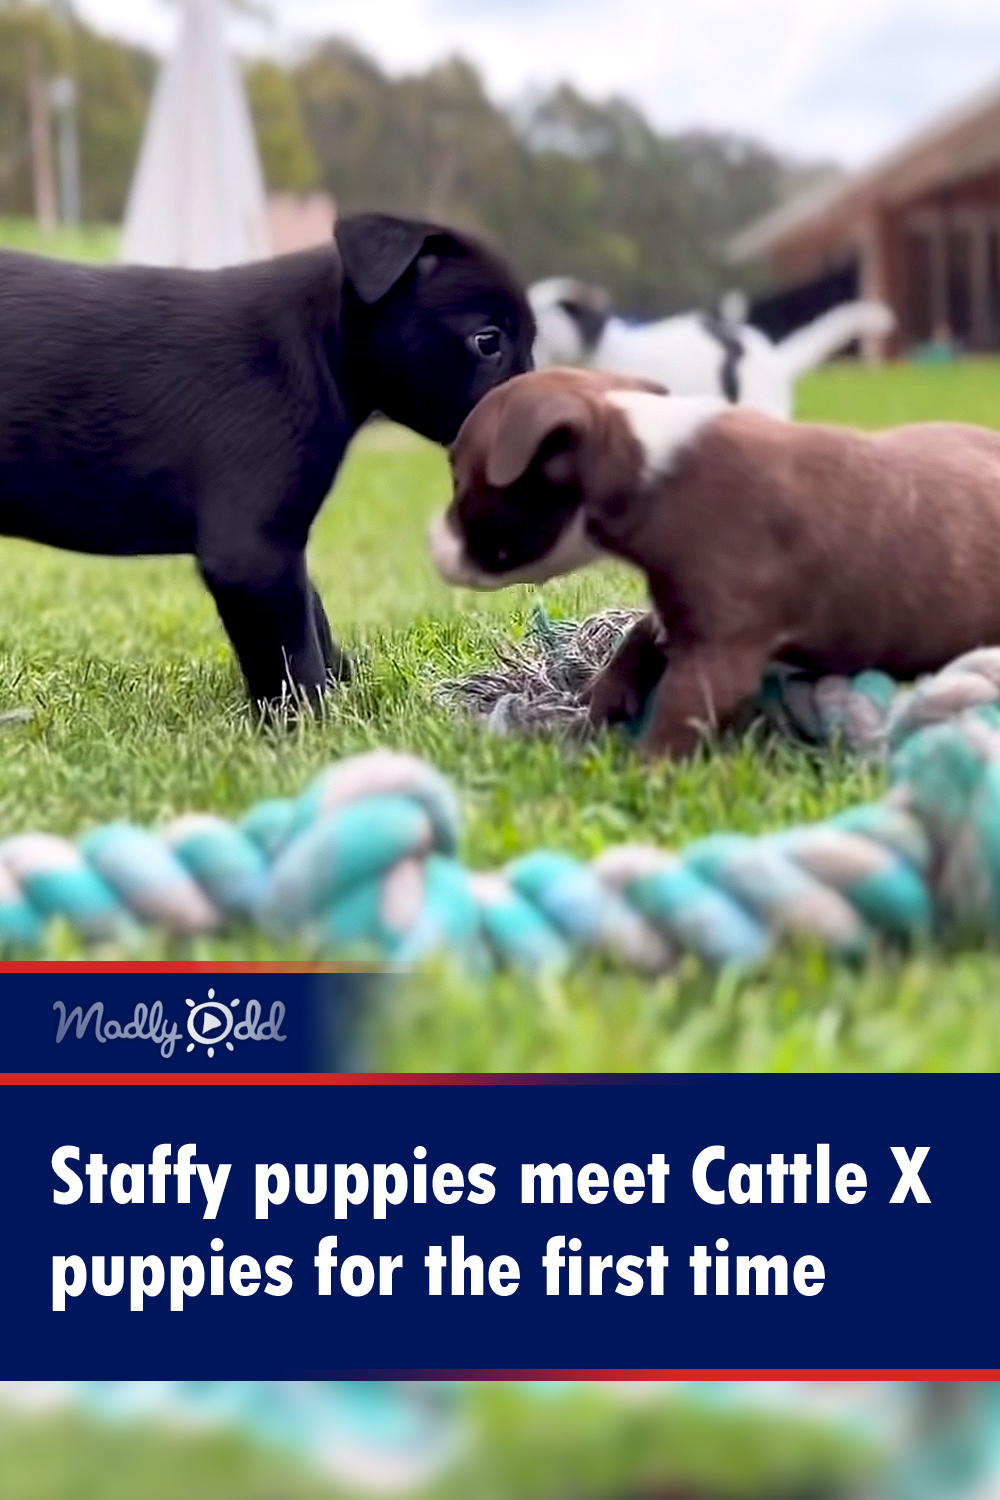 Staffy puppies meet Cattle X puppies for the first time